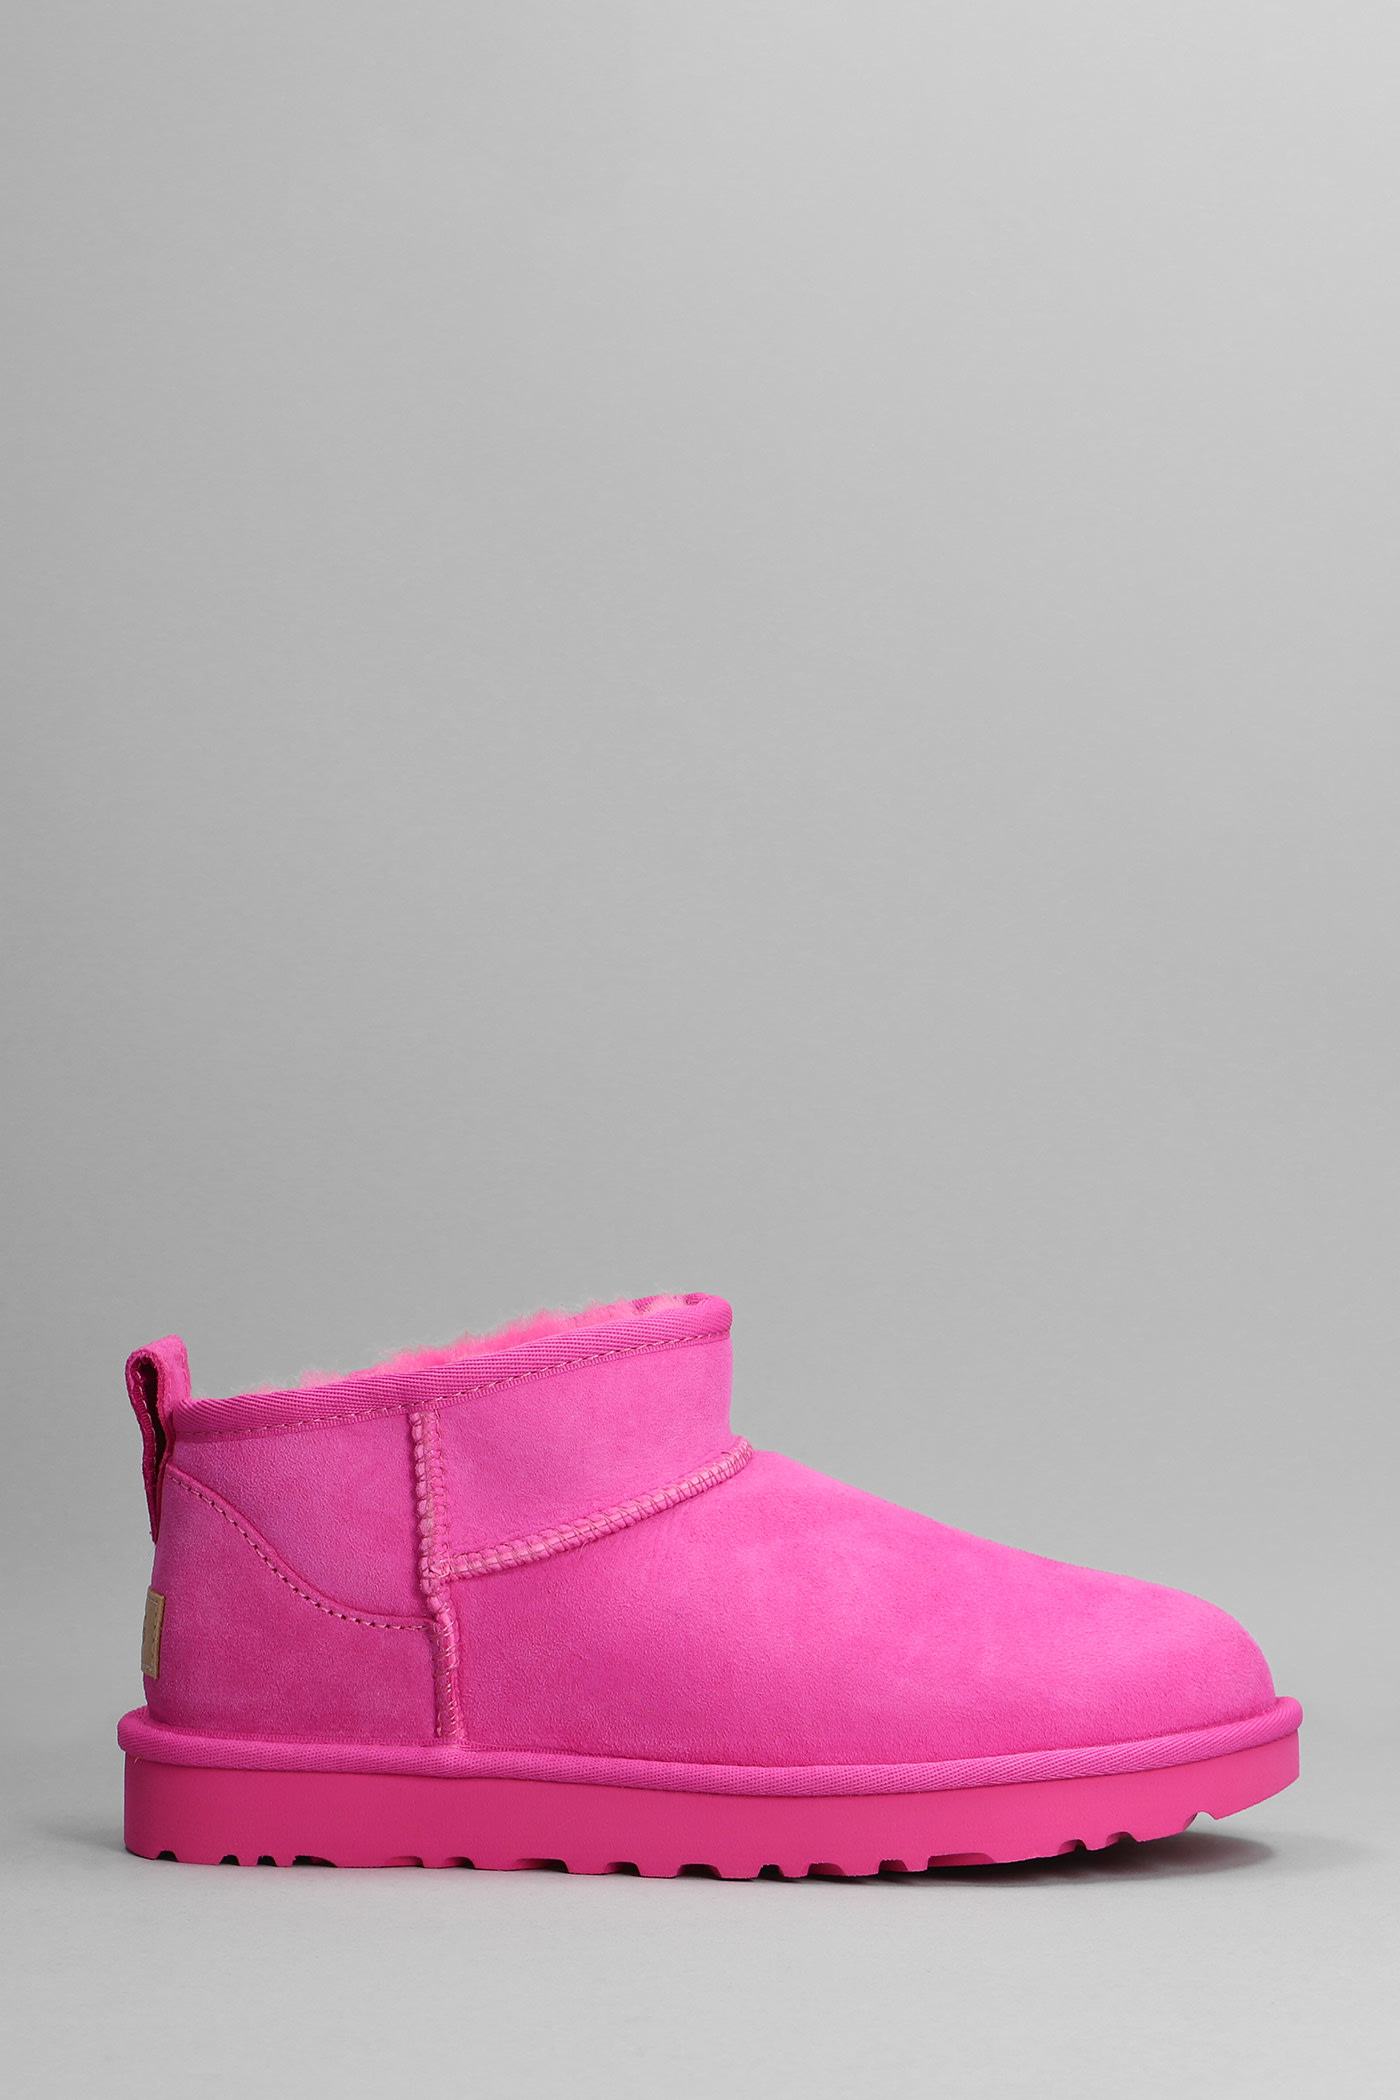 UGG CLASSIC ULTRA MINI LOW HEELS ANKLE BOOTS IN FUXIA SUEDE